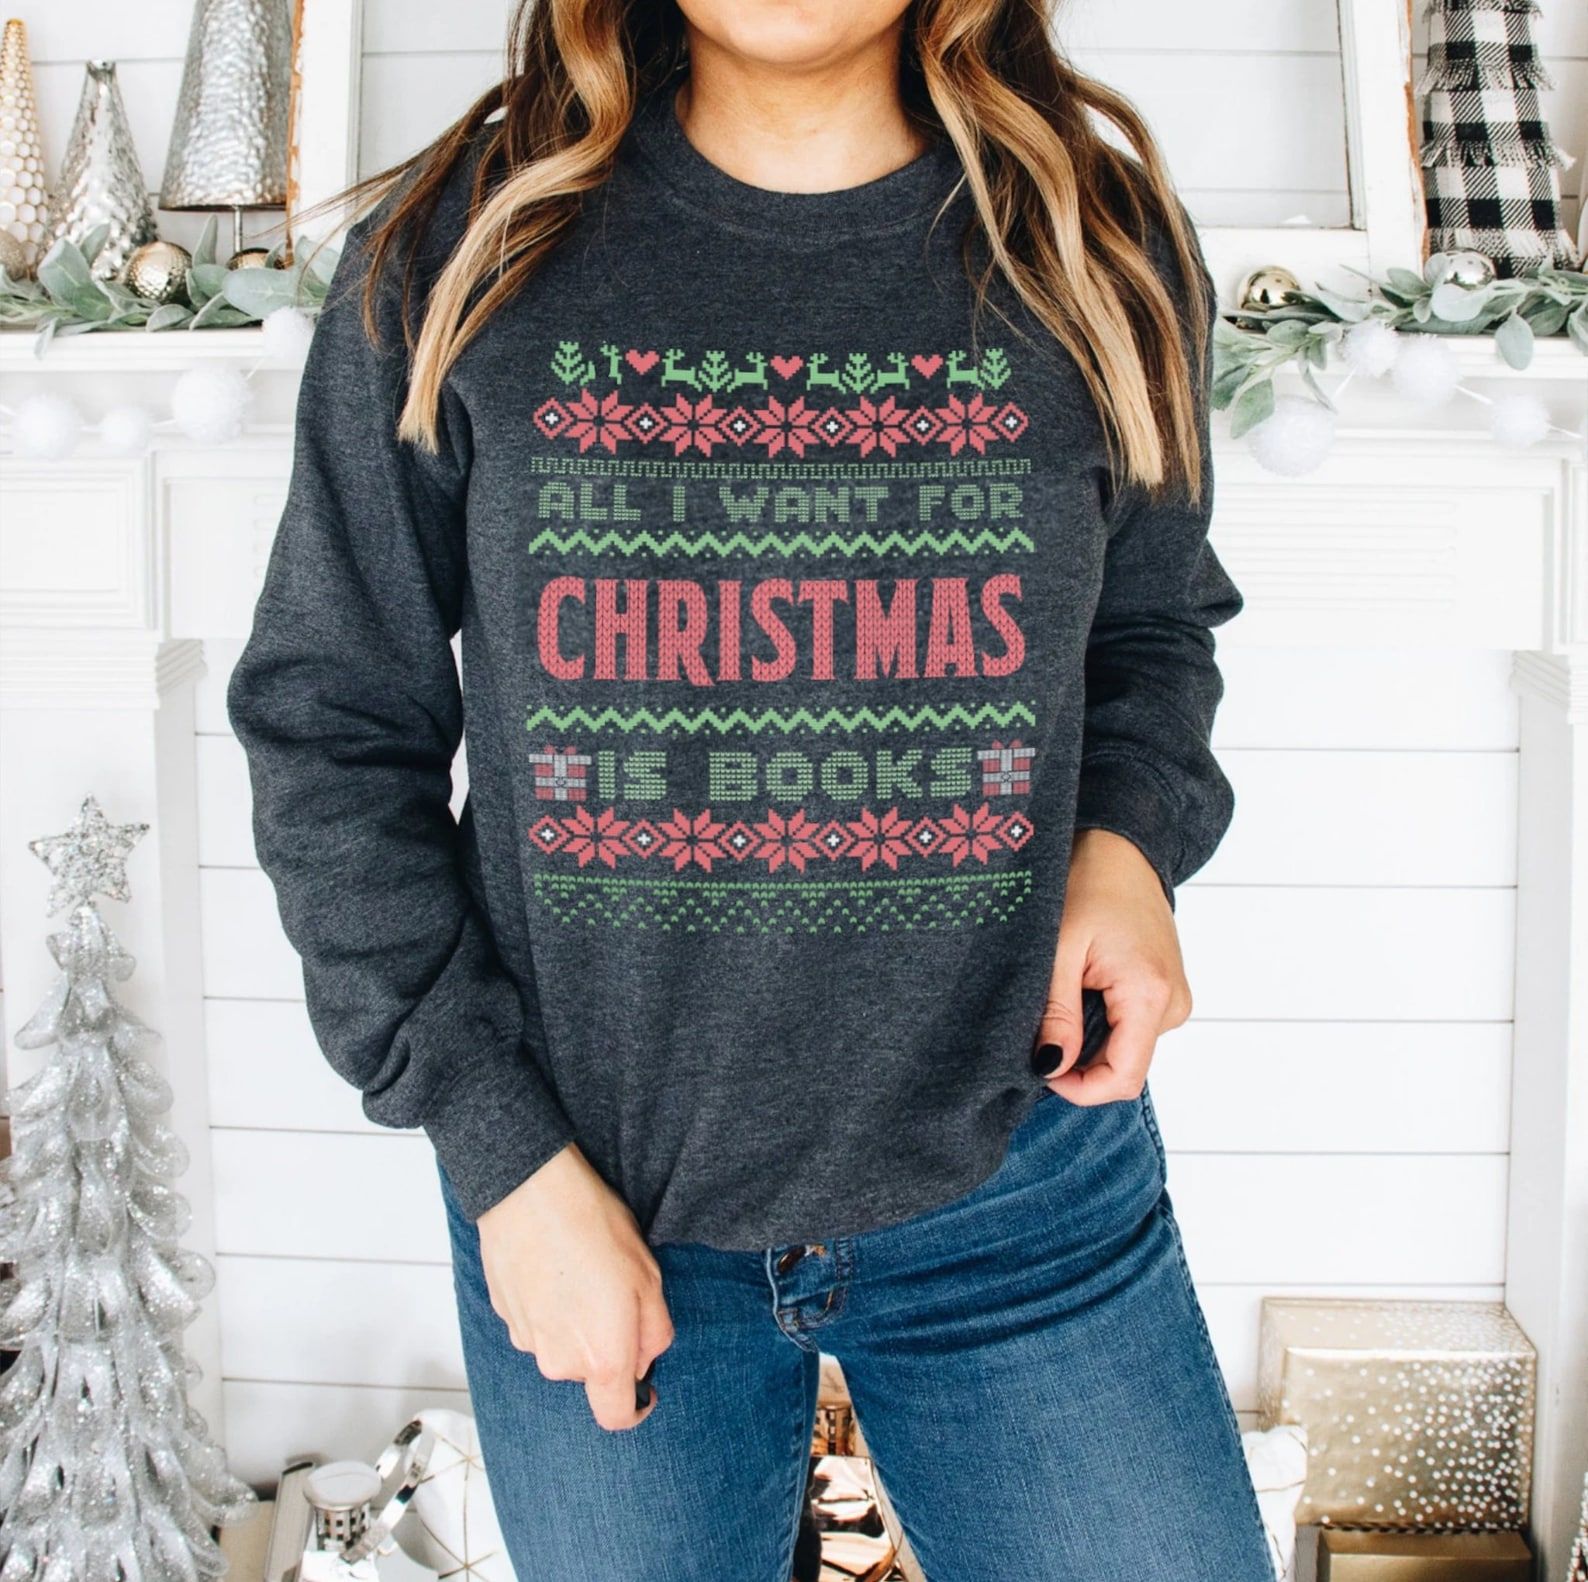 Dark gray sweater with a knit motif in red and green that reads "All I want for Christmas is books"